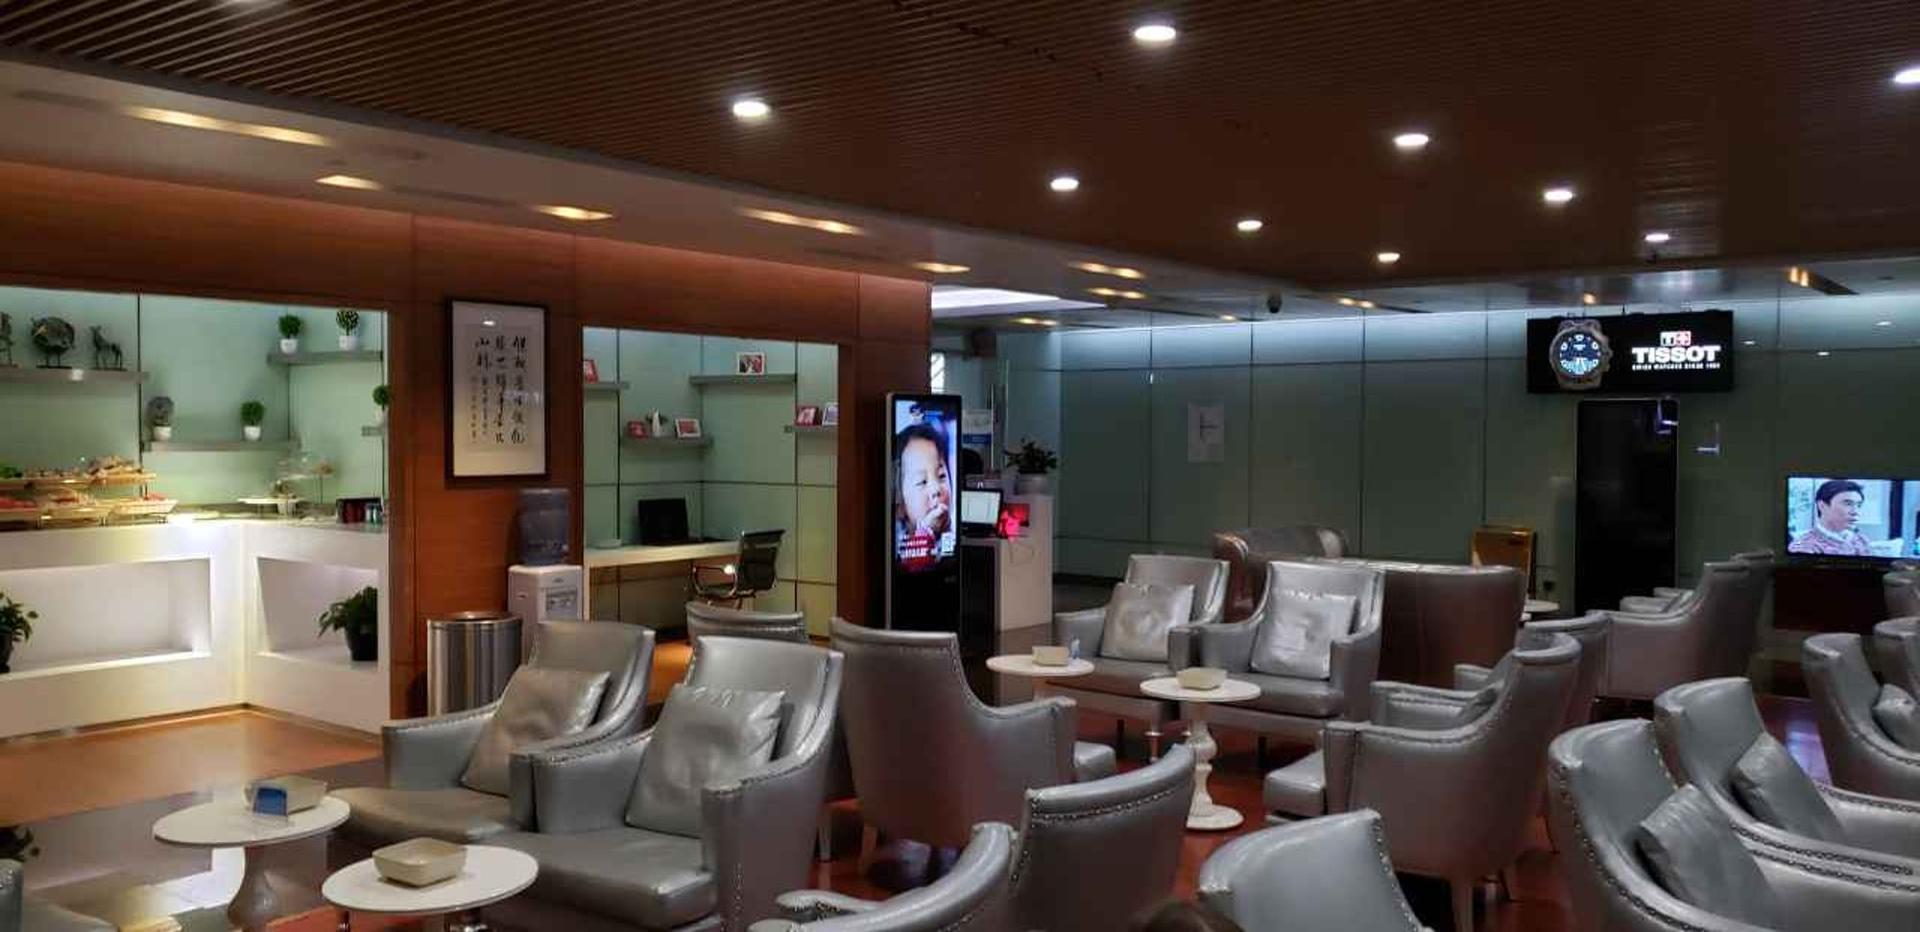 Chengdu Airport First Class Lounge (Gate 172) image 1 of 2